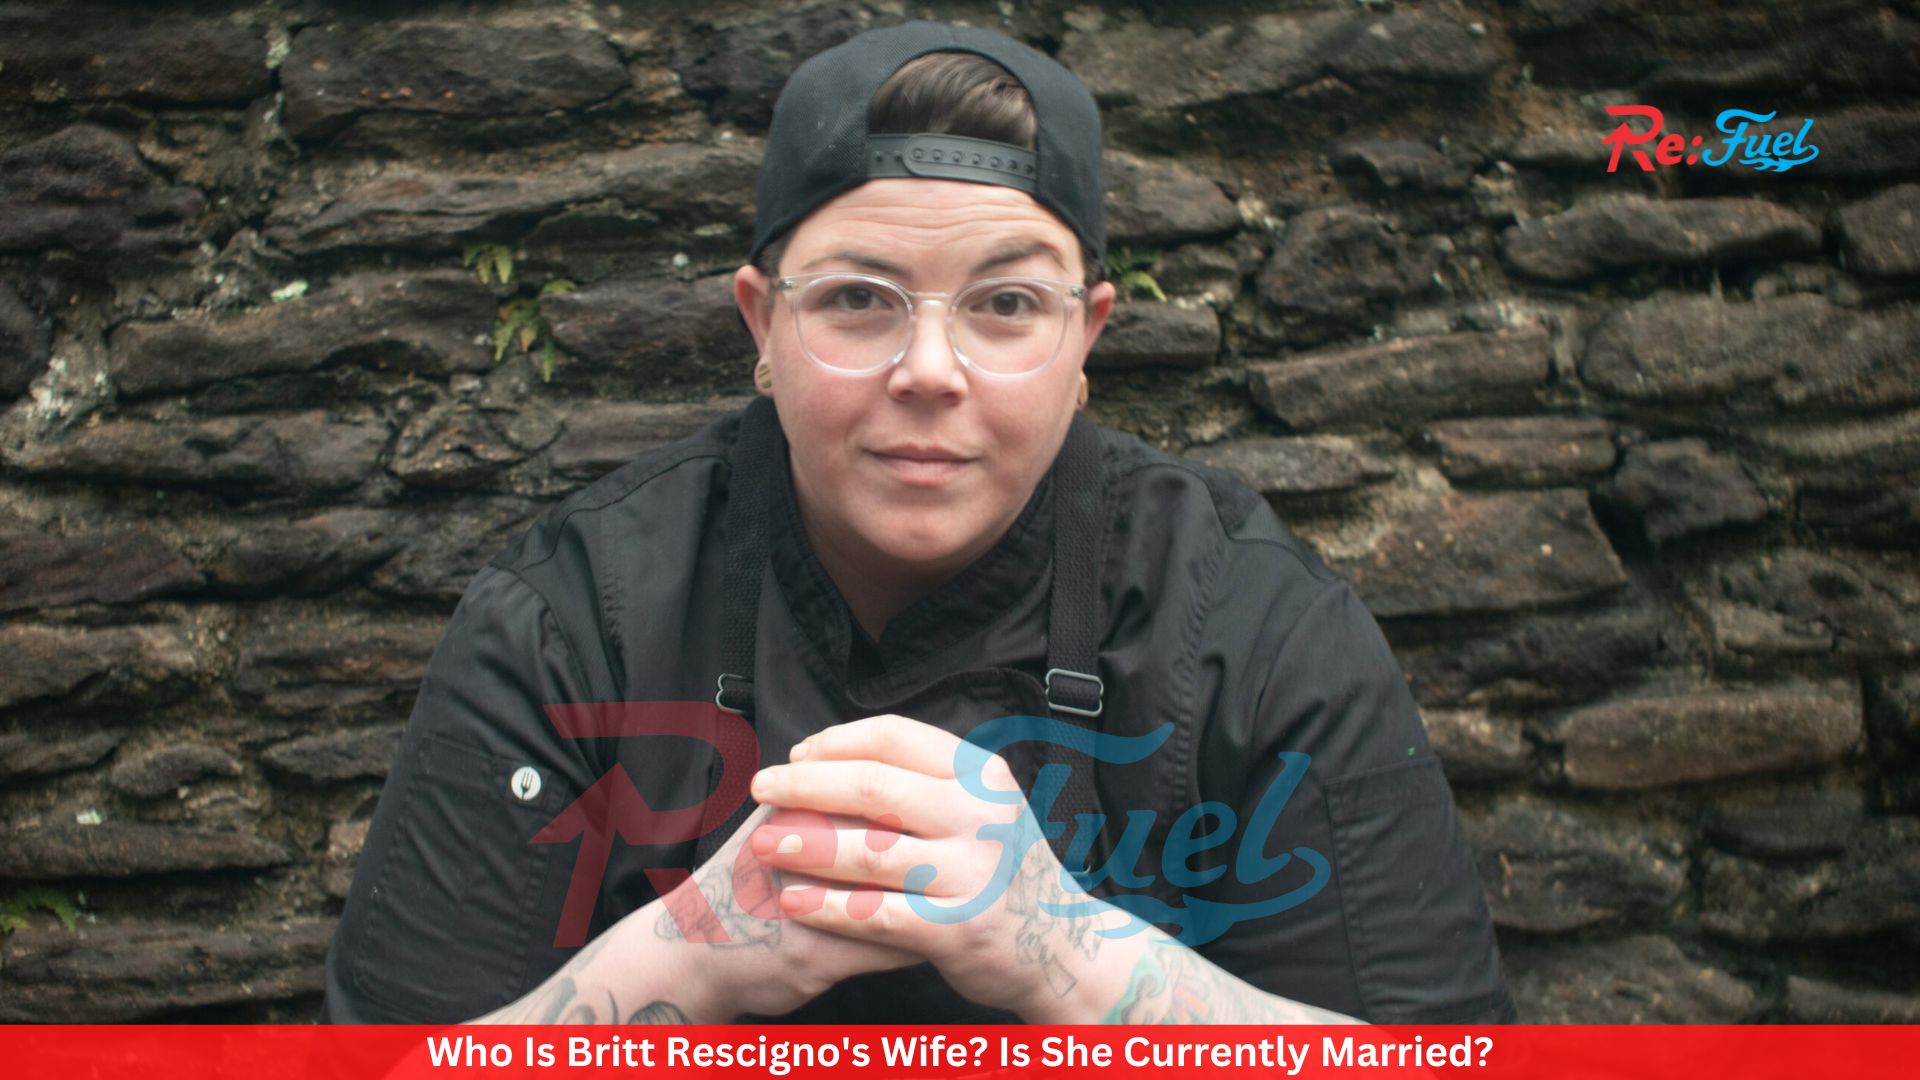 Who Is Britt Rescigno's Wife? Is She Currently Married?